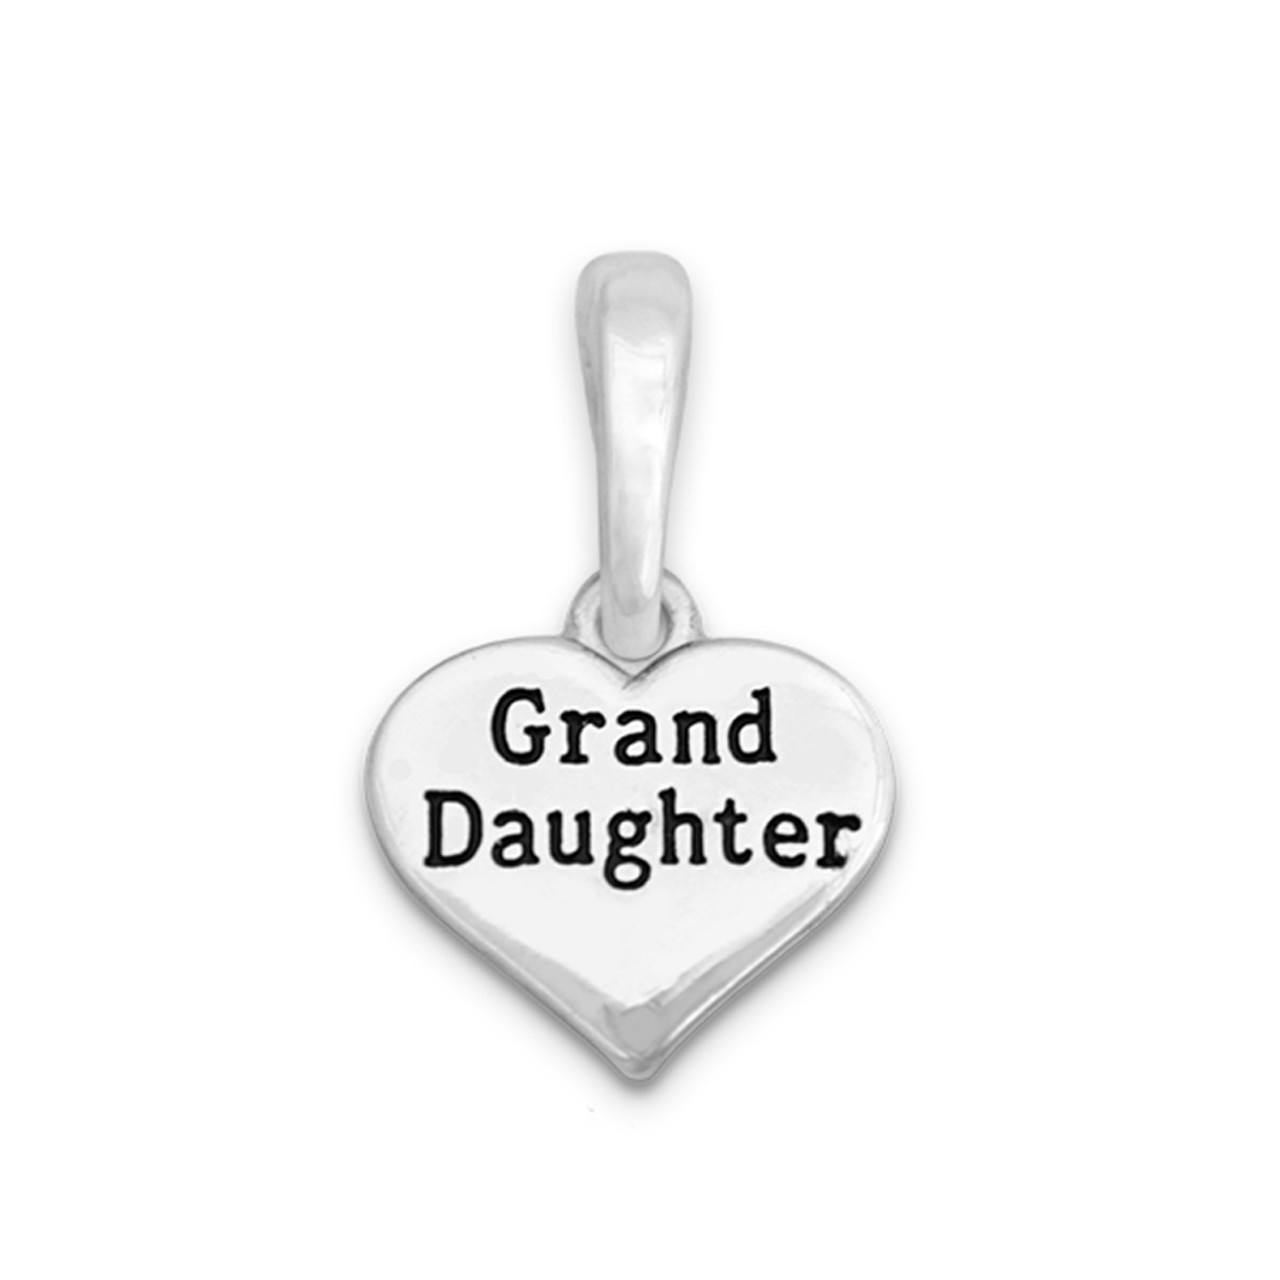 Charming Choices Charm - Grand Daughter Heart